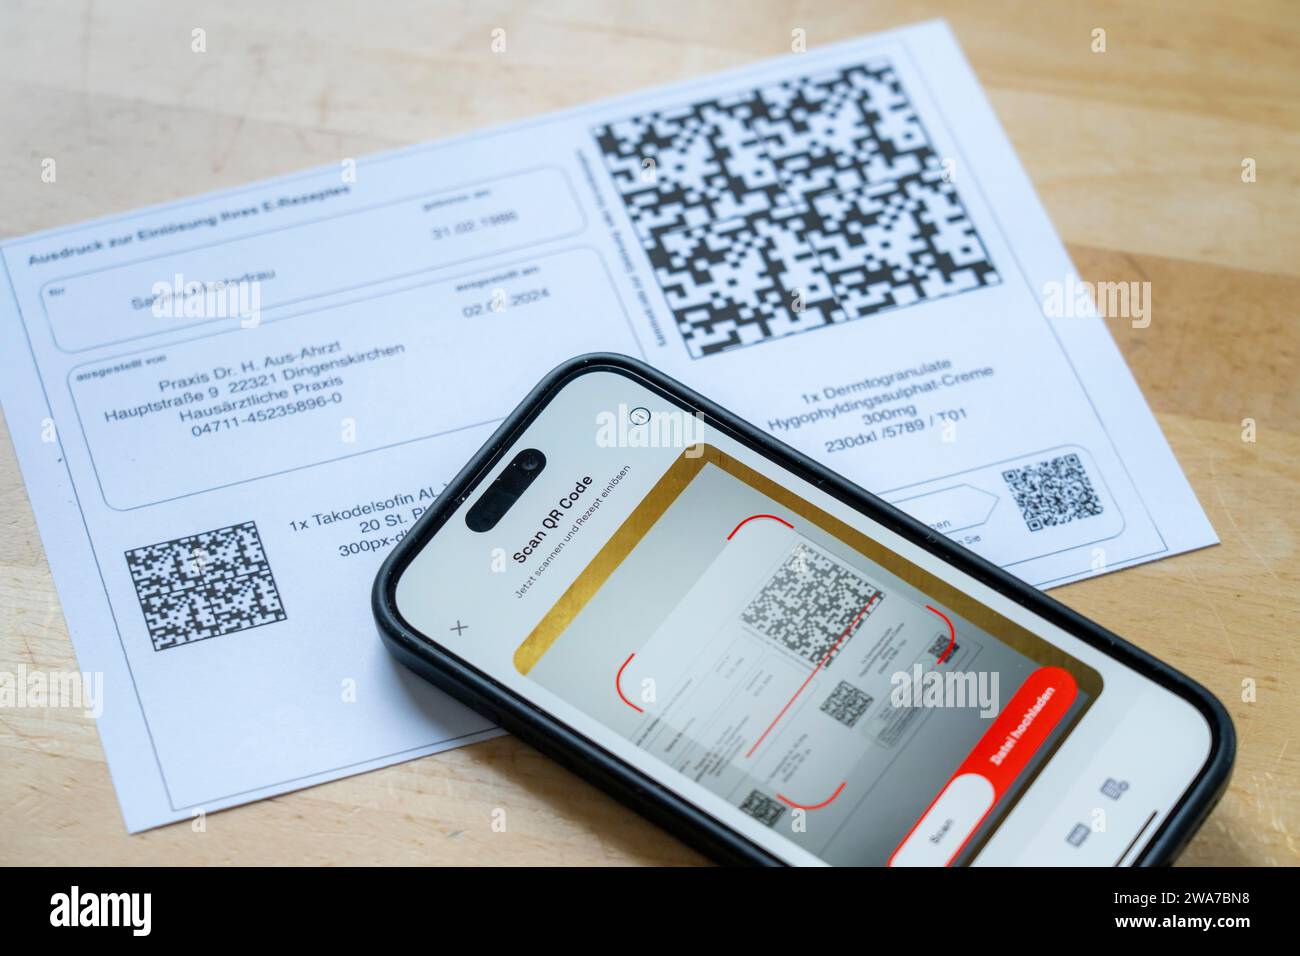 Symbolic image of an e-prescription, prescription issued by a doctor, with QR code, is scanned using a mobile phone and a special app, the code is the Stock Photo